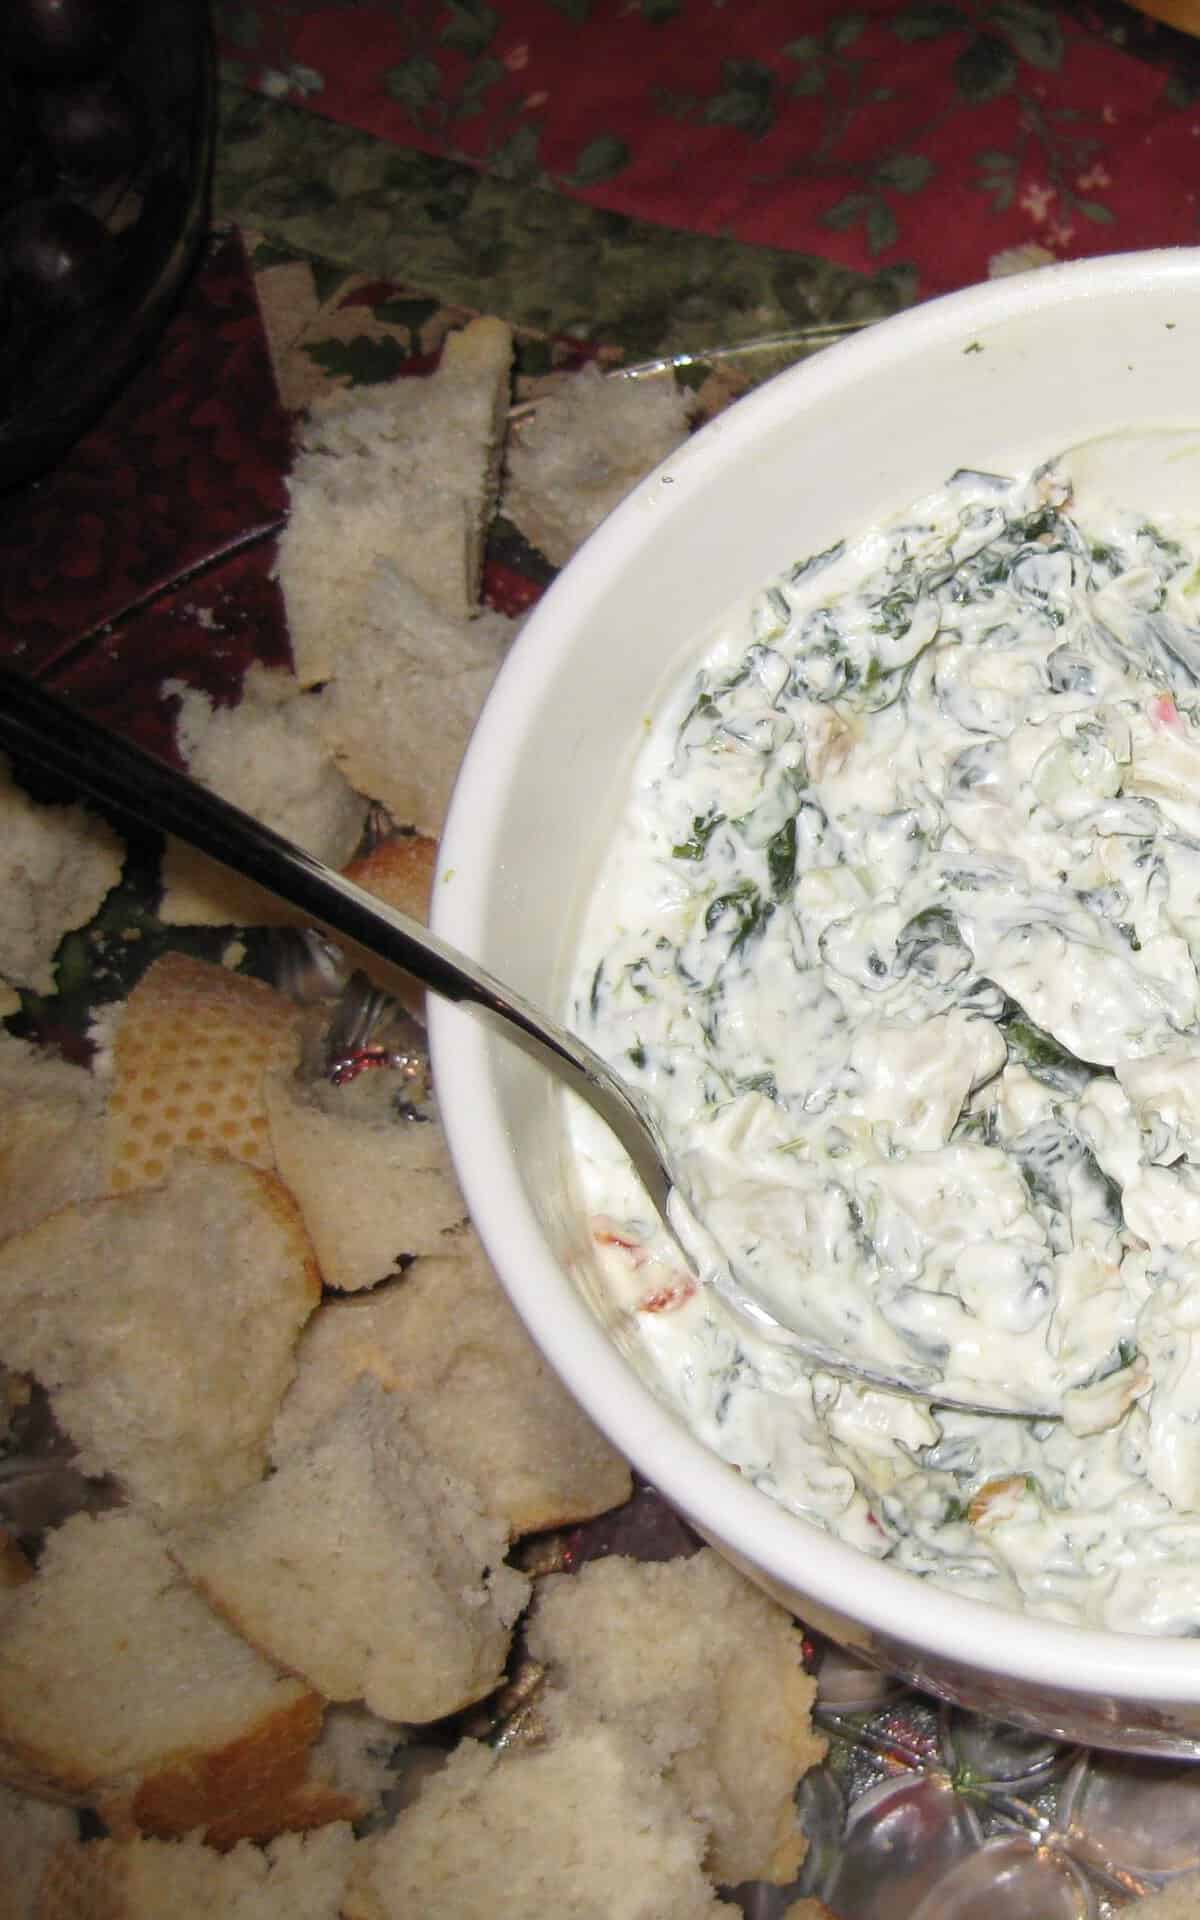  The perfect party dip that's easy to make and full of flavor!